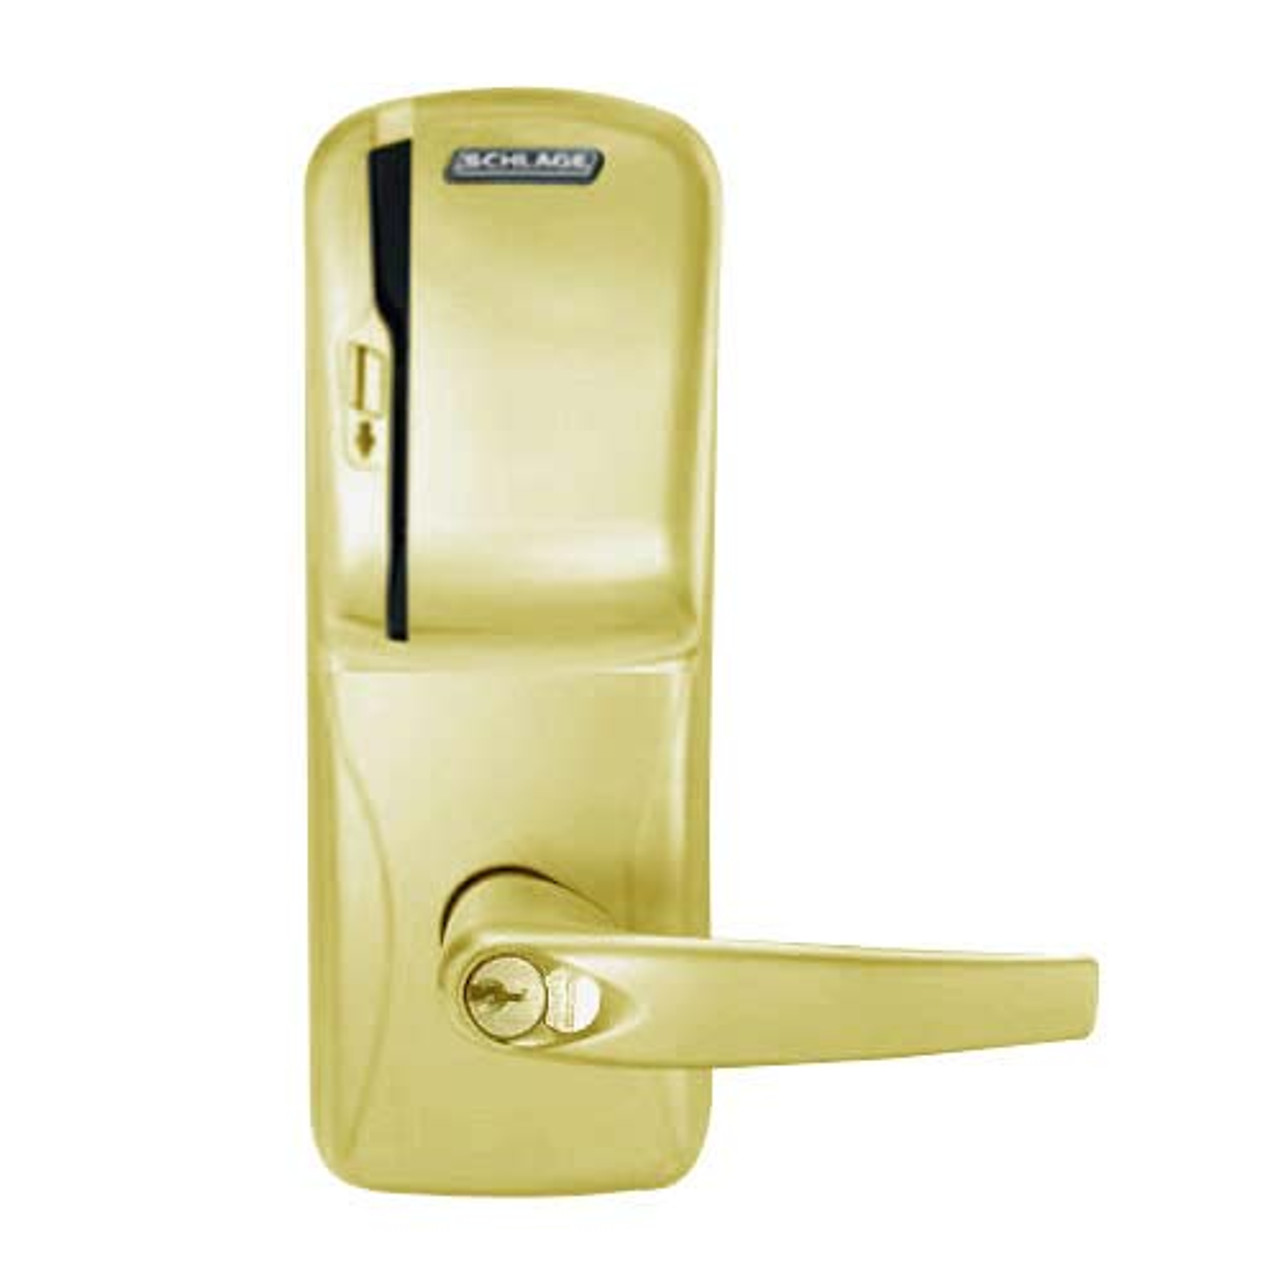 CO200-MD-40-MS-ATH-GD-29R-606 Mortise Deadbolt Standalone Electronic Magnetic Stripe Locks in Satin Brass